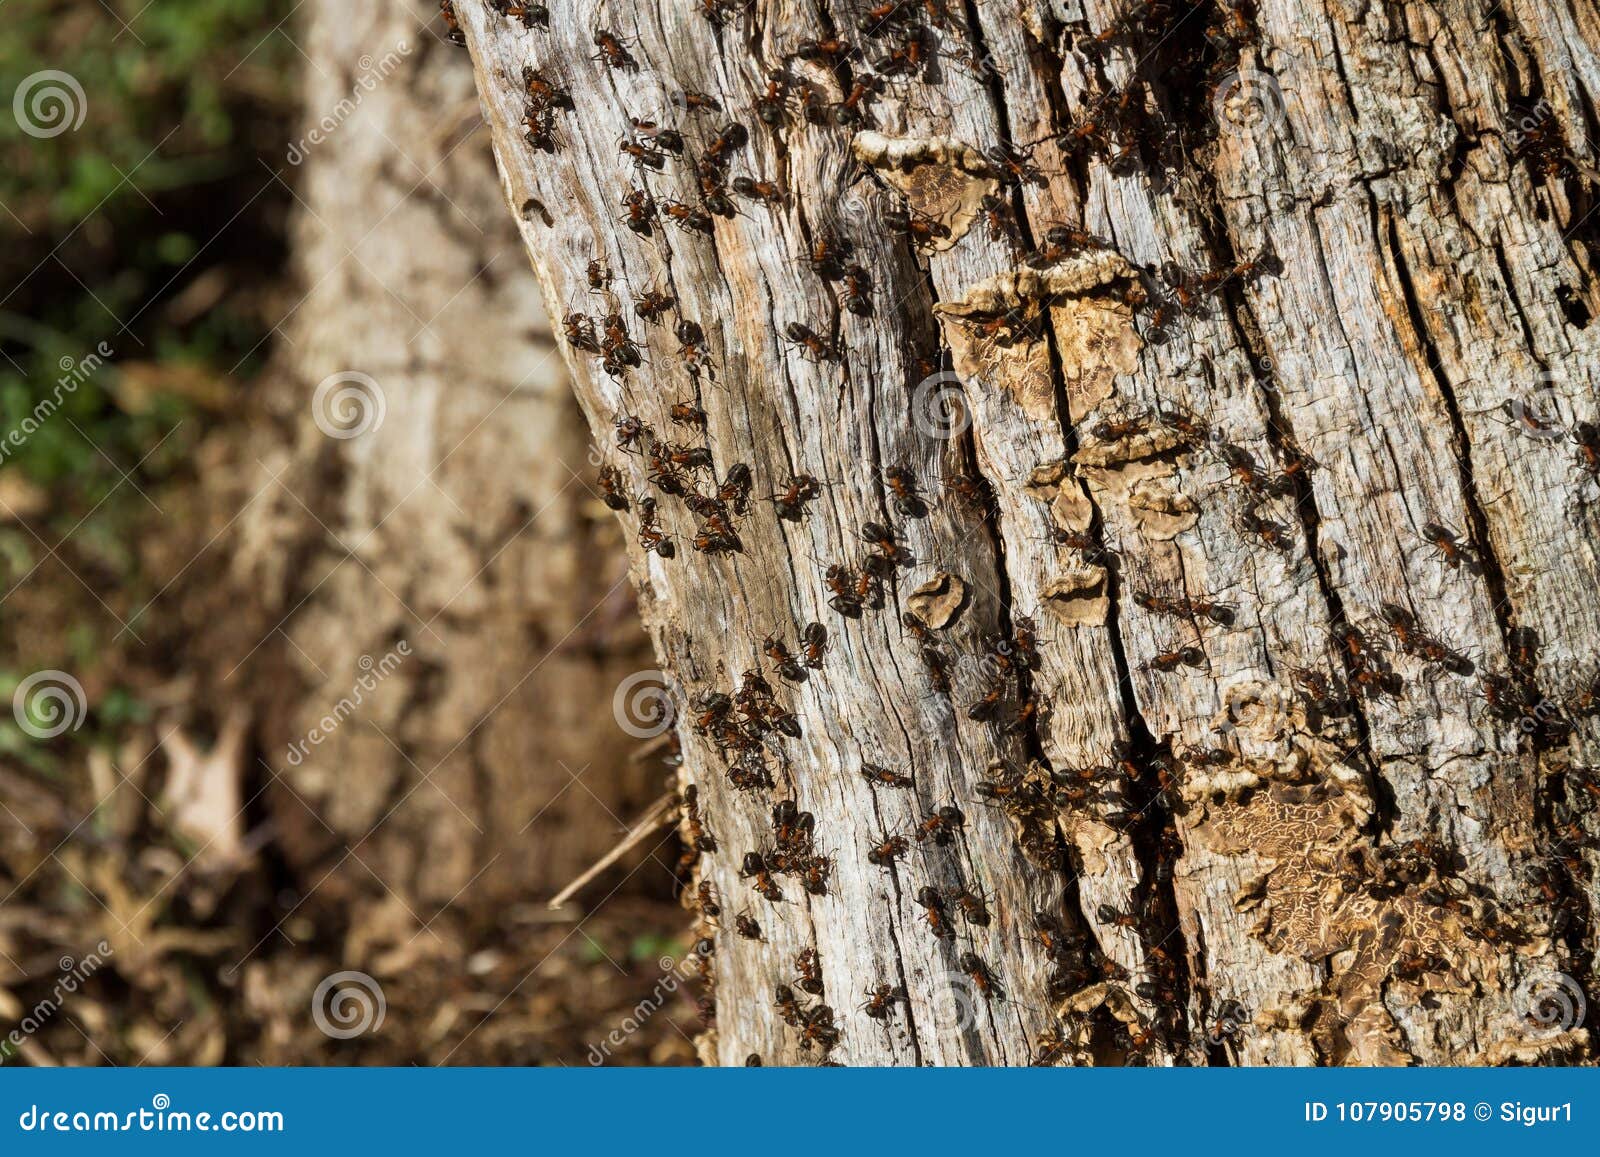 ant hill on tree trunk